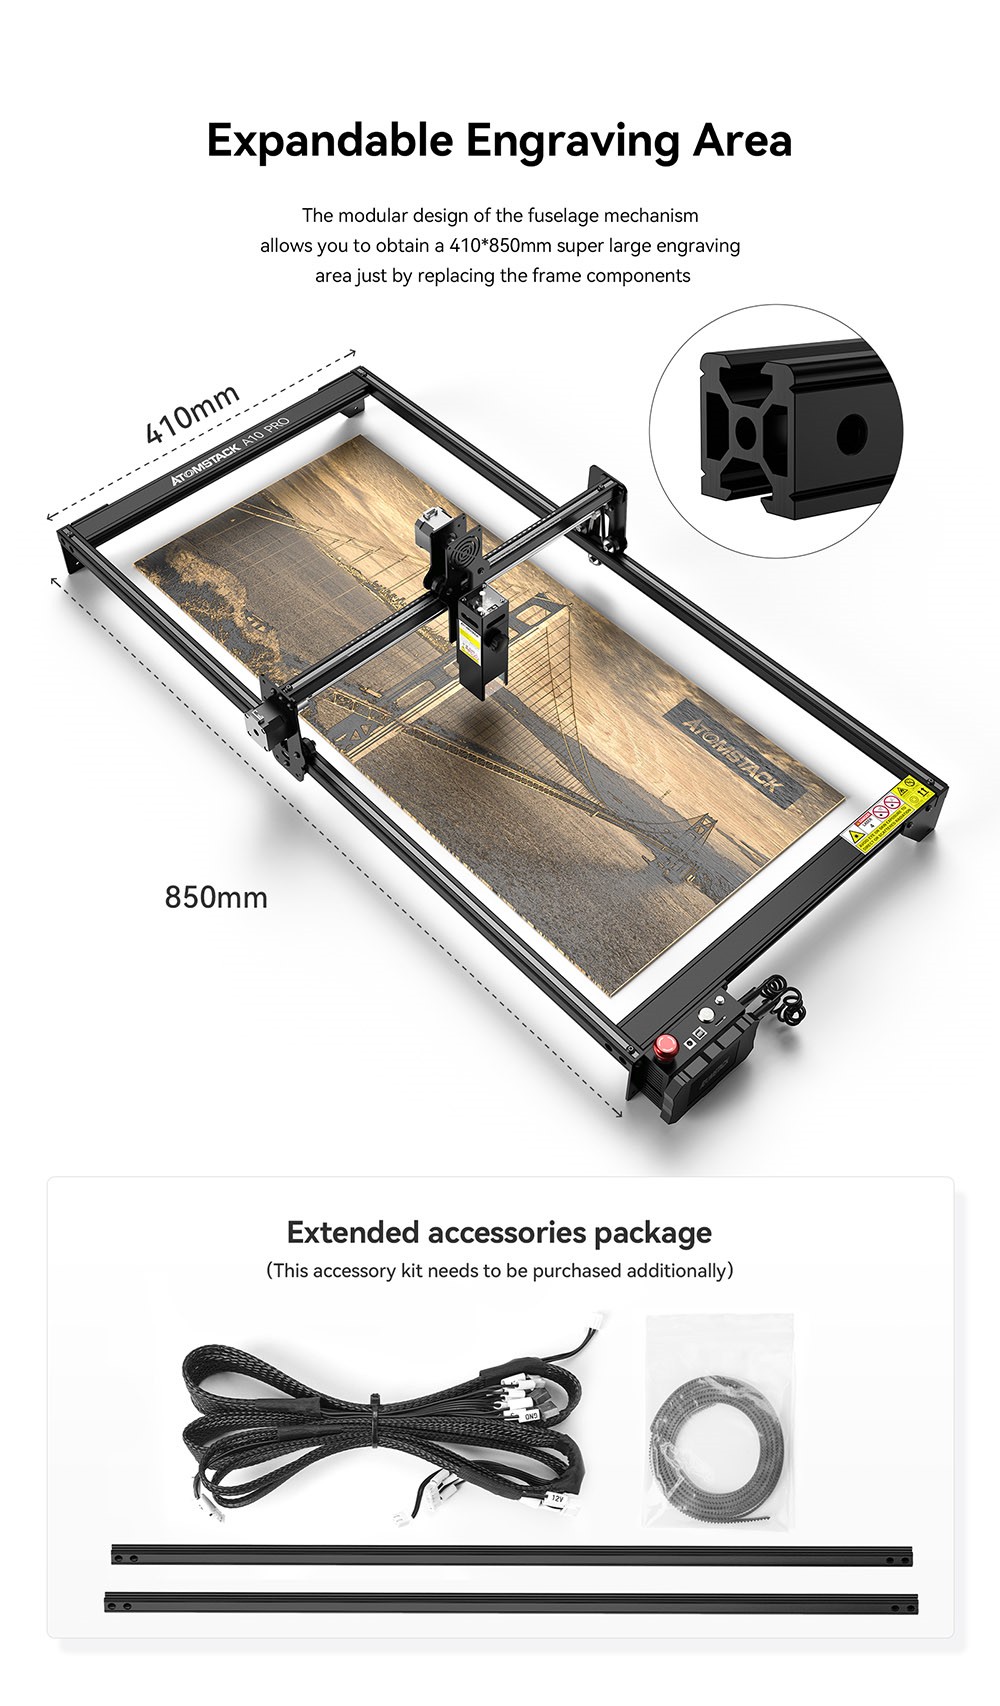 ATOMSTACK A10 Pro Laser Engraver Cutter, 10W Laser Power, 50W Electric Power, Fixed-Focus, Dual Compression Spot, Offline Engraving, Panoramic Glass Eye Protection, 410x400mm